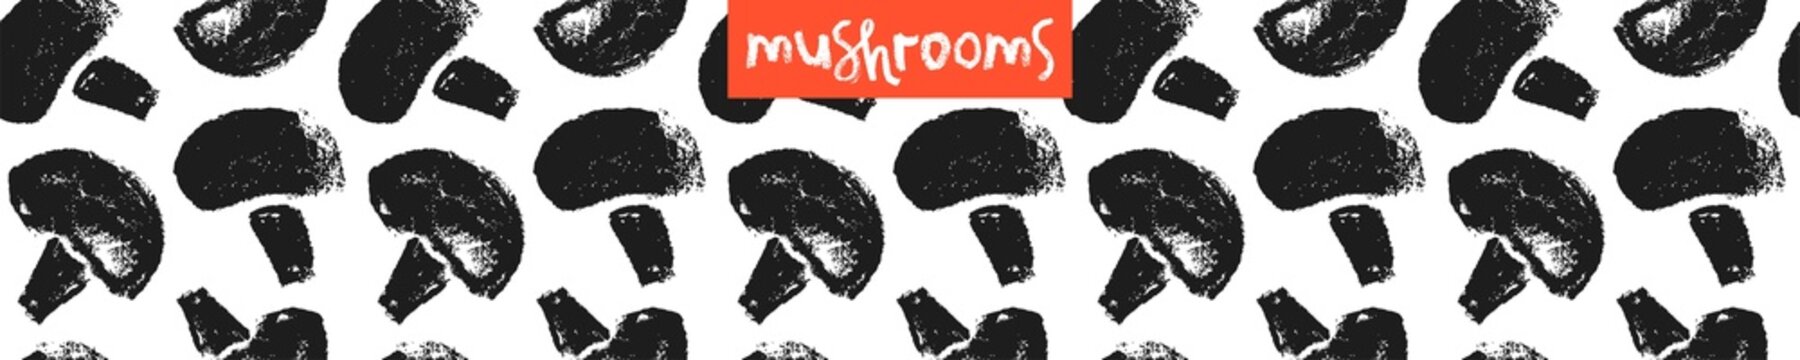 Vector champignon hand-drawn Illustration. Mushrooms pattern seamless. Vegetarian cooking courses banner. Edible fungi wallpapers. Drawings for champignons label design. Mushroom soup ingredients.